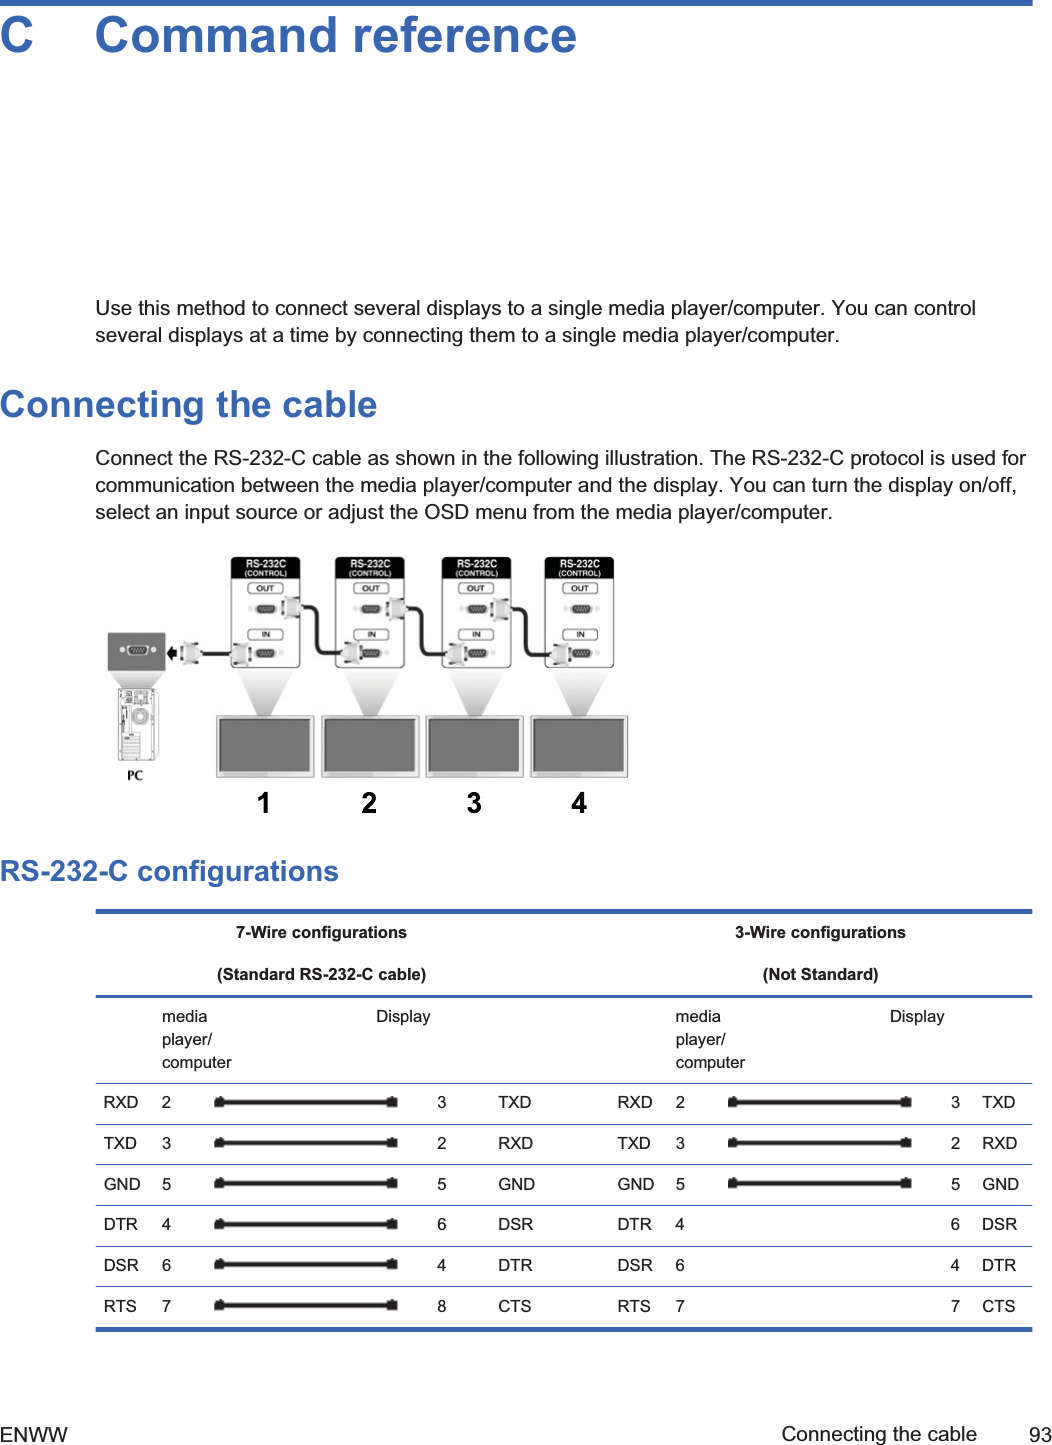 C Command referenceUse this method to connect several displays to a single media player/computer. You can controlseveral displays at a time by connecting them to a single media player/computer.Connecting the cableConnect the RS-232-C cable as shown in the following illustration. The RS-232-C protocol is used forcommunication between the media player/computer and the display. You can turn the display on/off,select an input source or adjust the OSD menu from the media player/computer.RS-232-C configurations7-Wire configurations(Standard RS-232-C cable) 3-Wire configurations(Not Standard) mediaplayer/computer  Display    mediaplayer/computer  Display RXD 2 3TXD RXD2 3TXDTXD 3 2RXD TXD3 2RXDGND 5 5GND GND5 5GNDDTR 4 6DSR DTR4    6DSRDSR 6 4DTR DSR6    4DTRRTS 7 8CTS RTS7    7CTSENWW Connecting the cable 932ndDraft